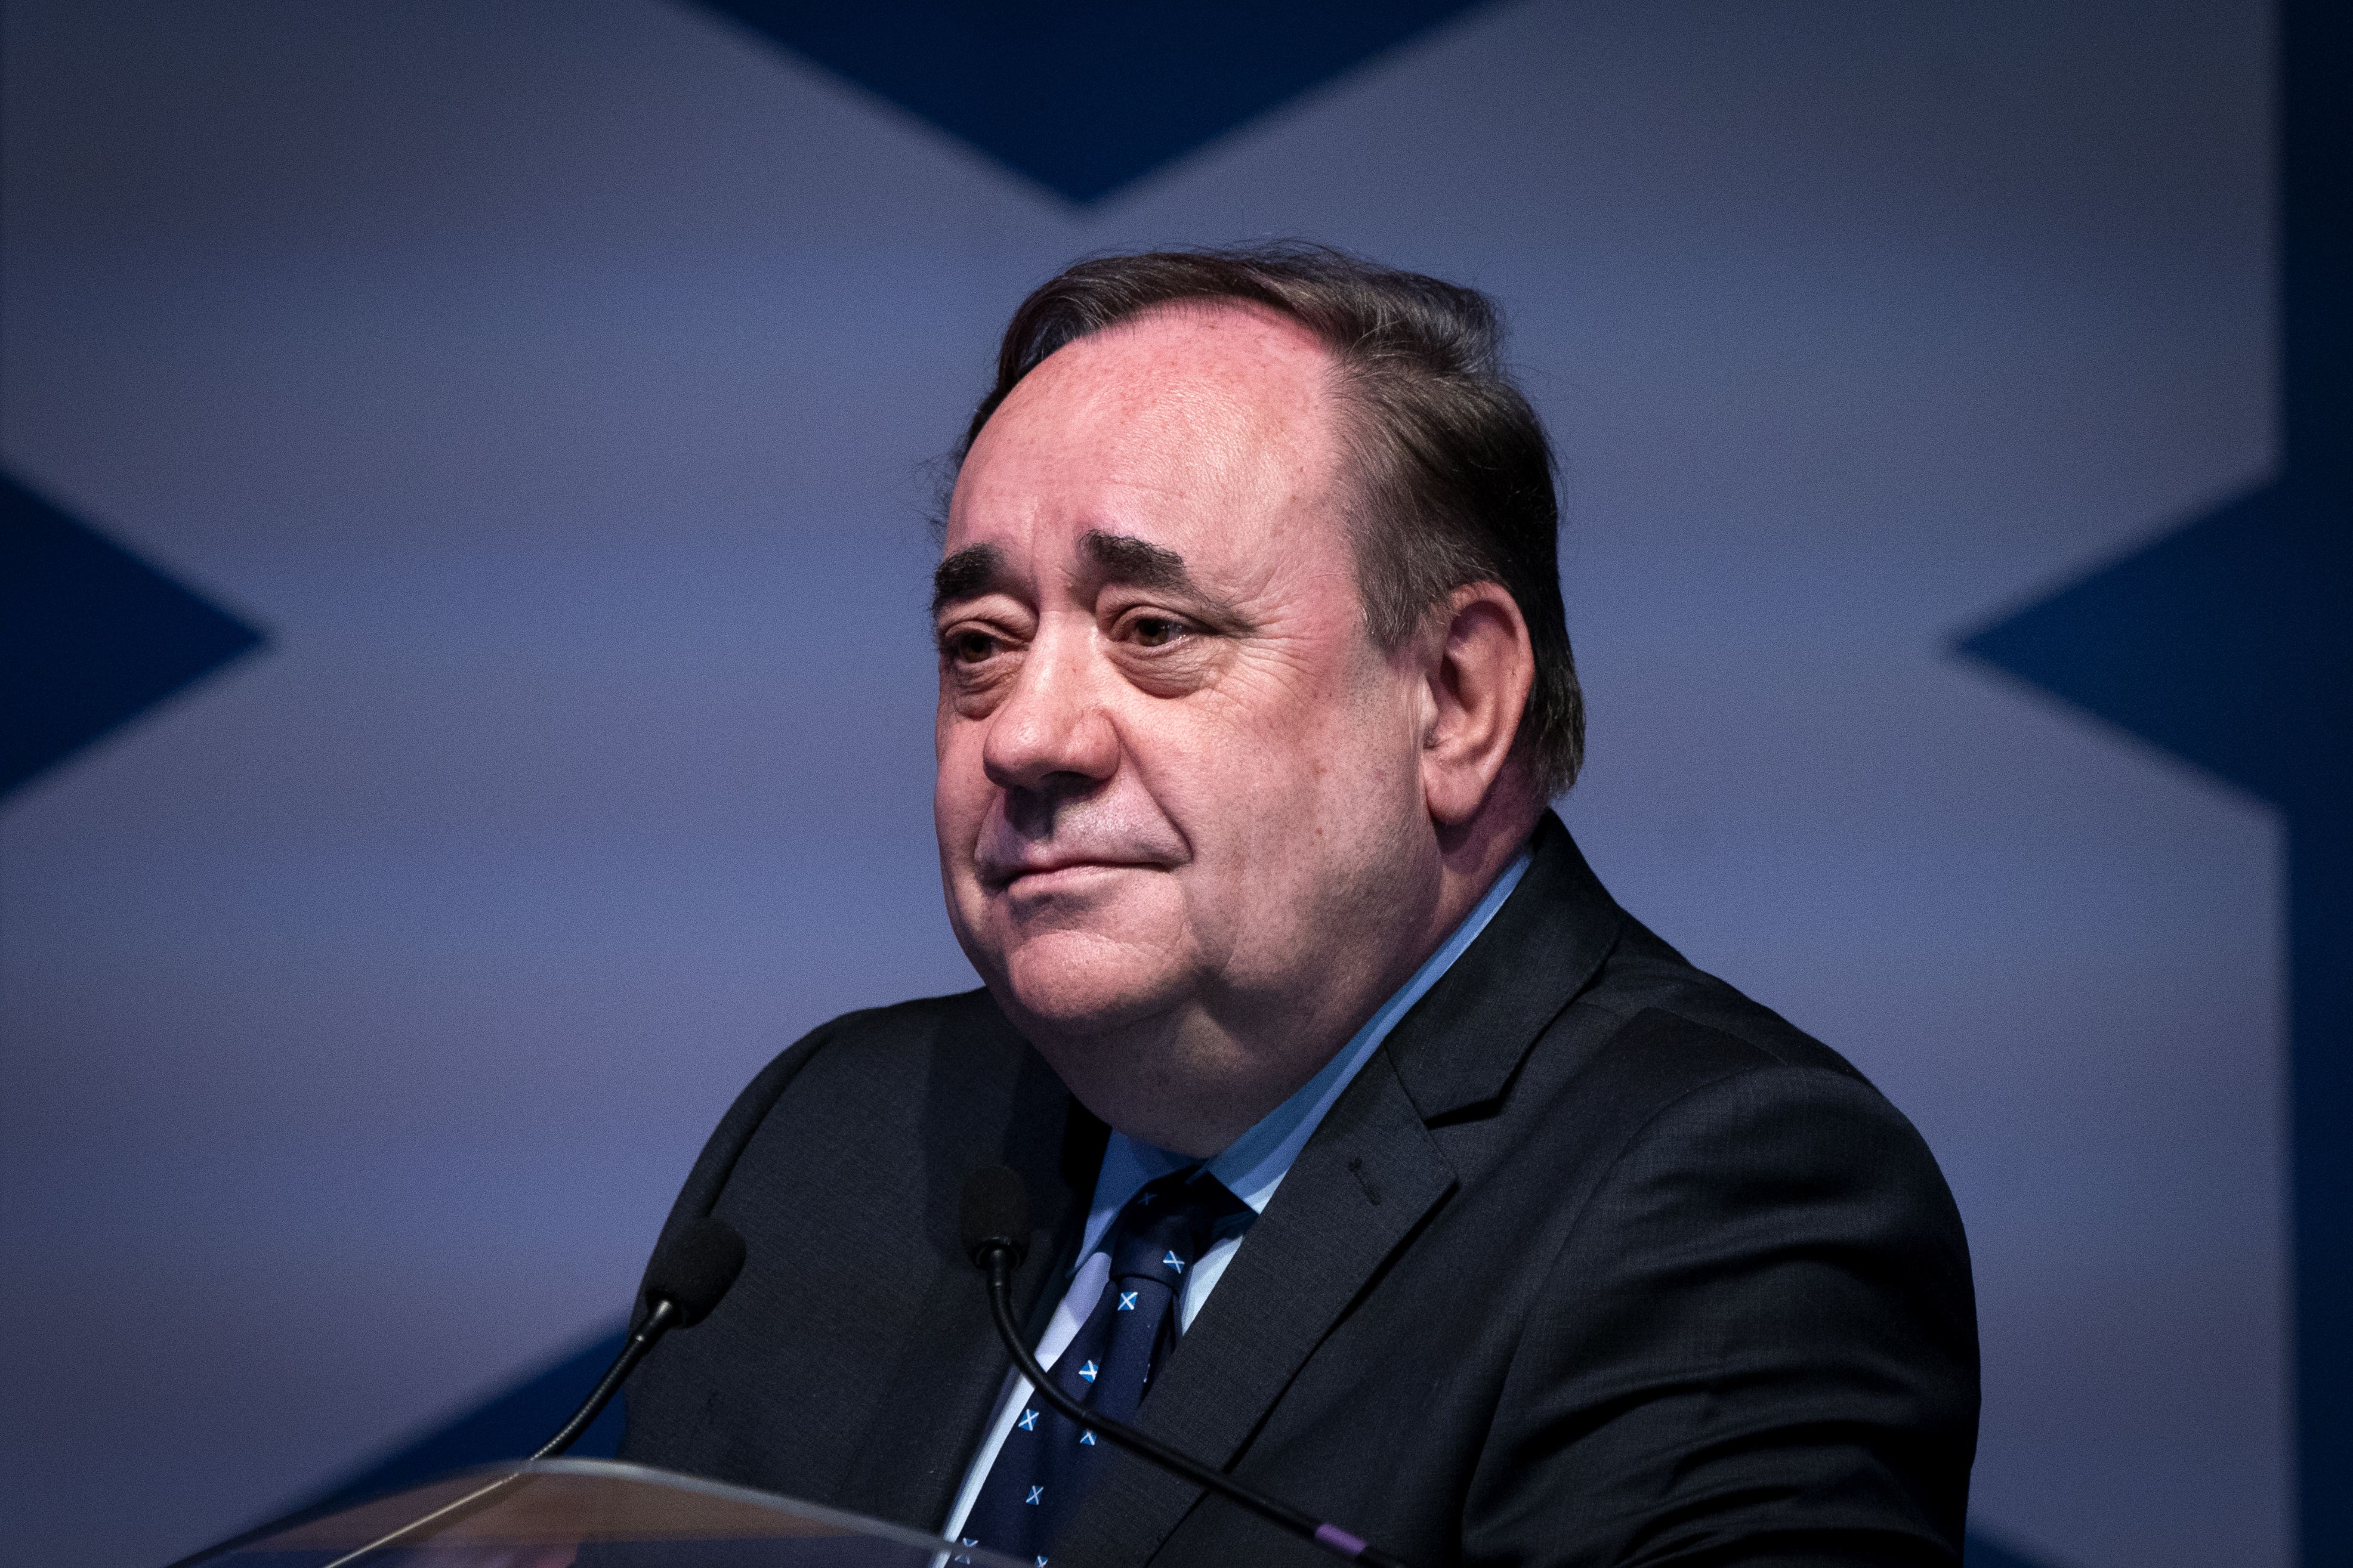 The regulator will investigate an episode of Talk TV’s ‘Richard Tice’ presented by Alex Salmond, which aired on 2 April